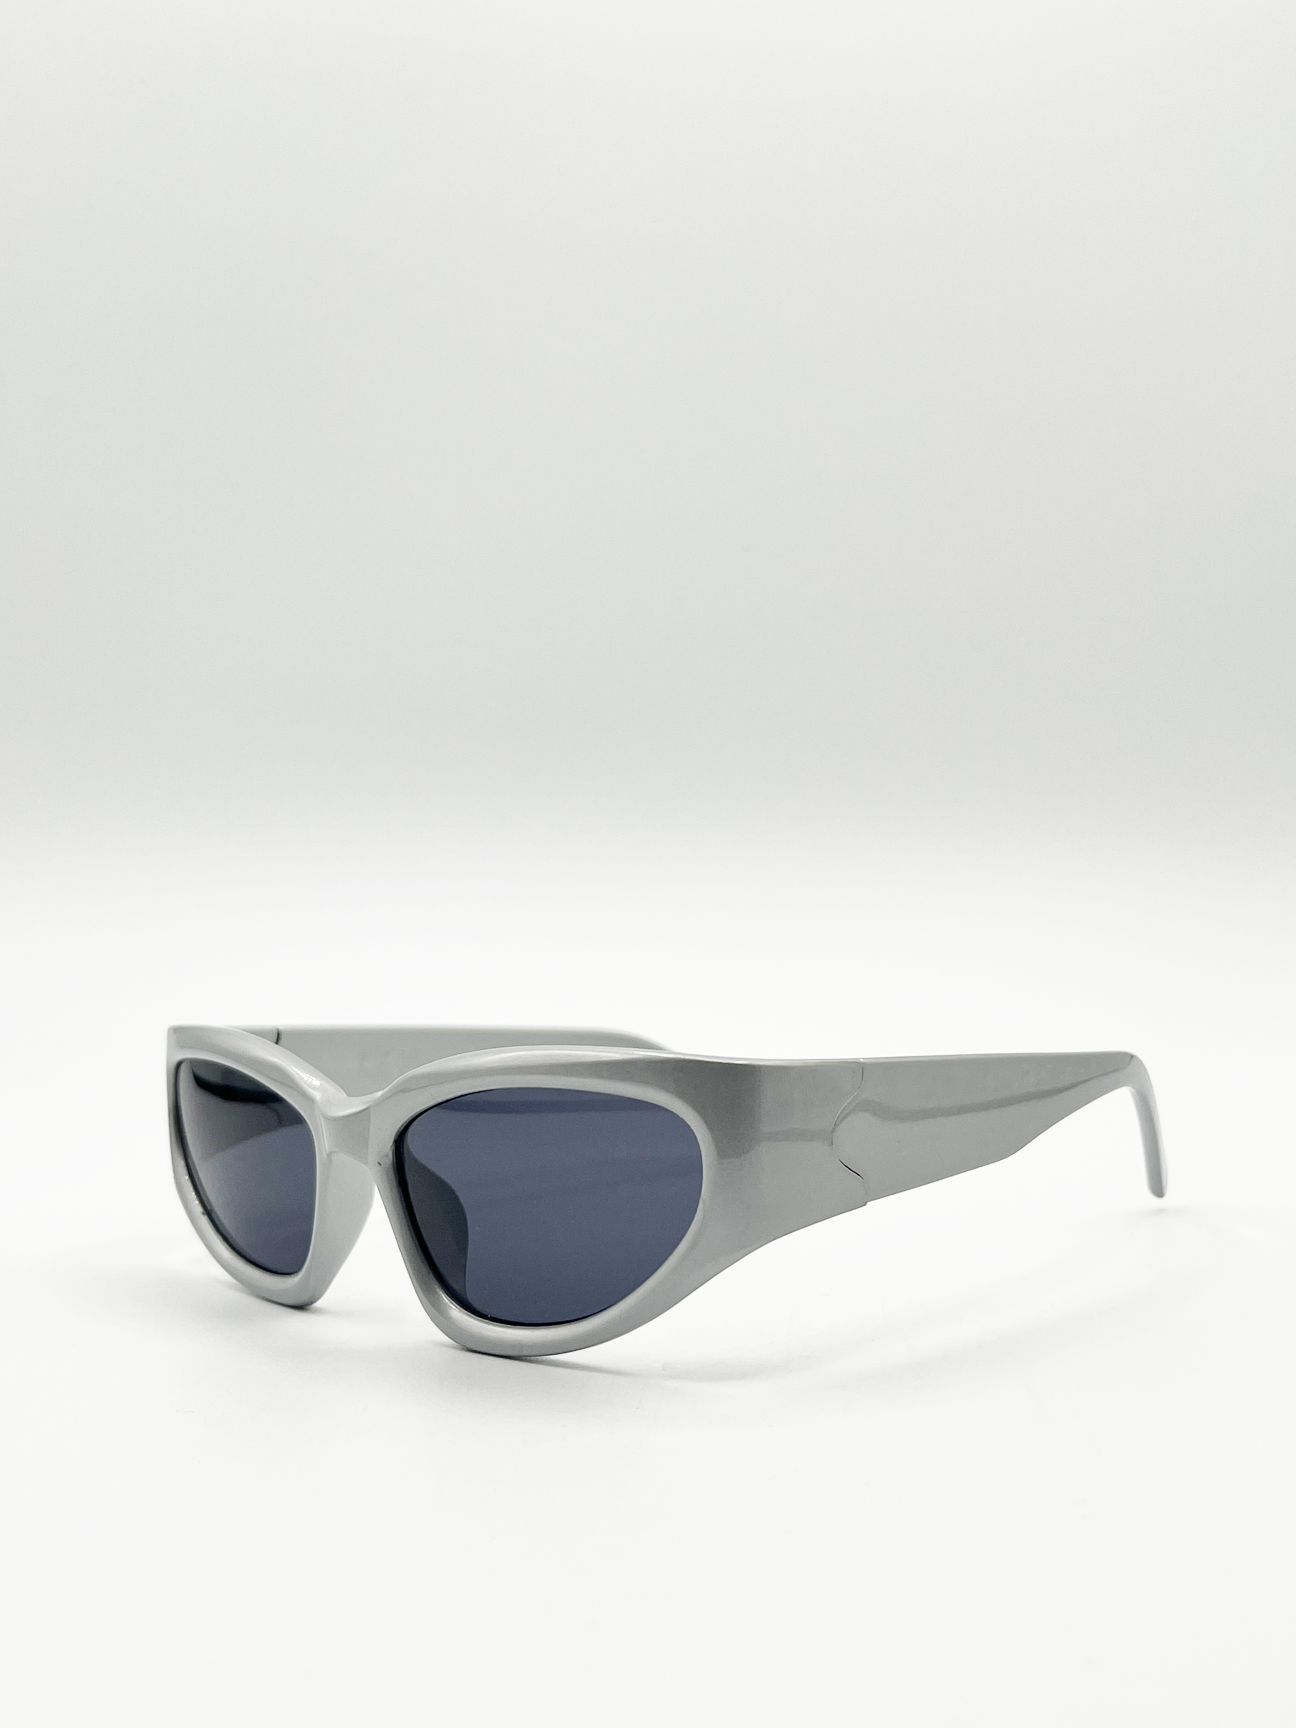 Silver Racer Style Sunglasses with Black Lenses